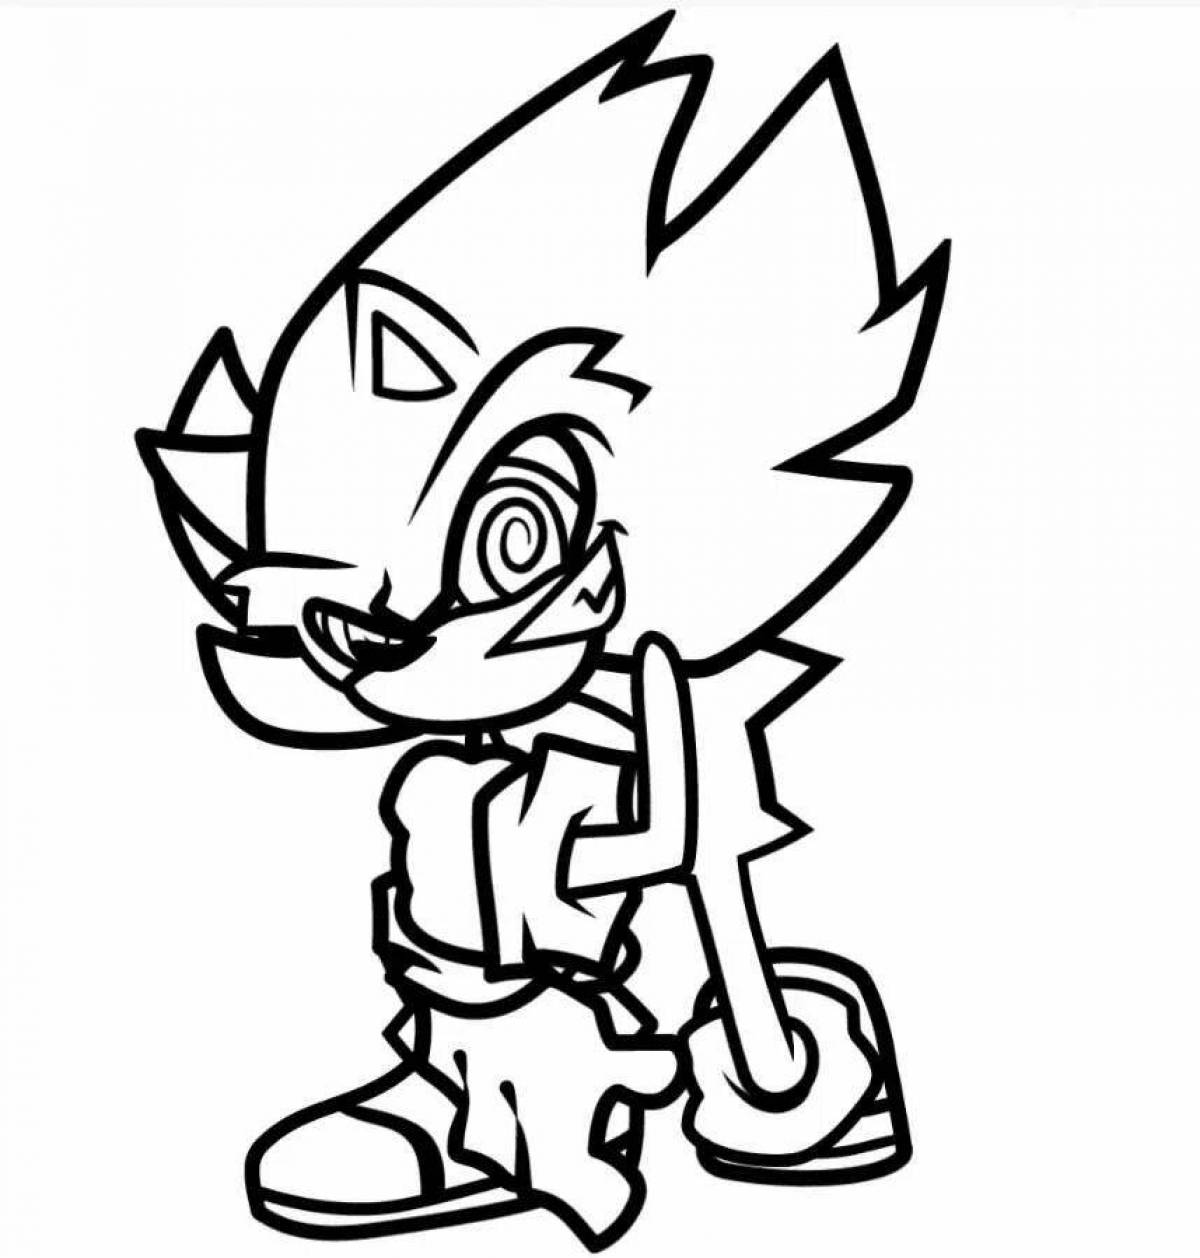 Sonic 3 coloring book